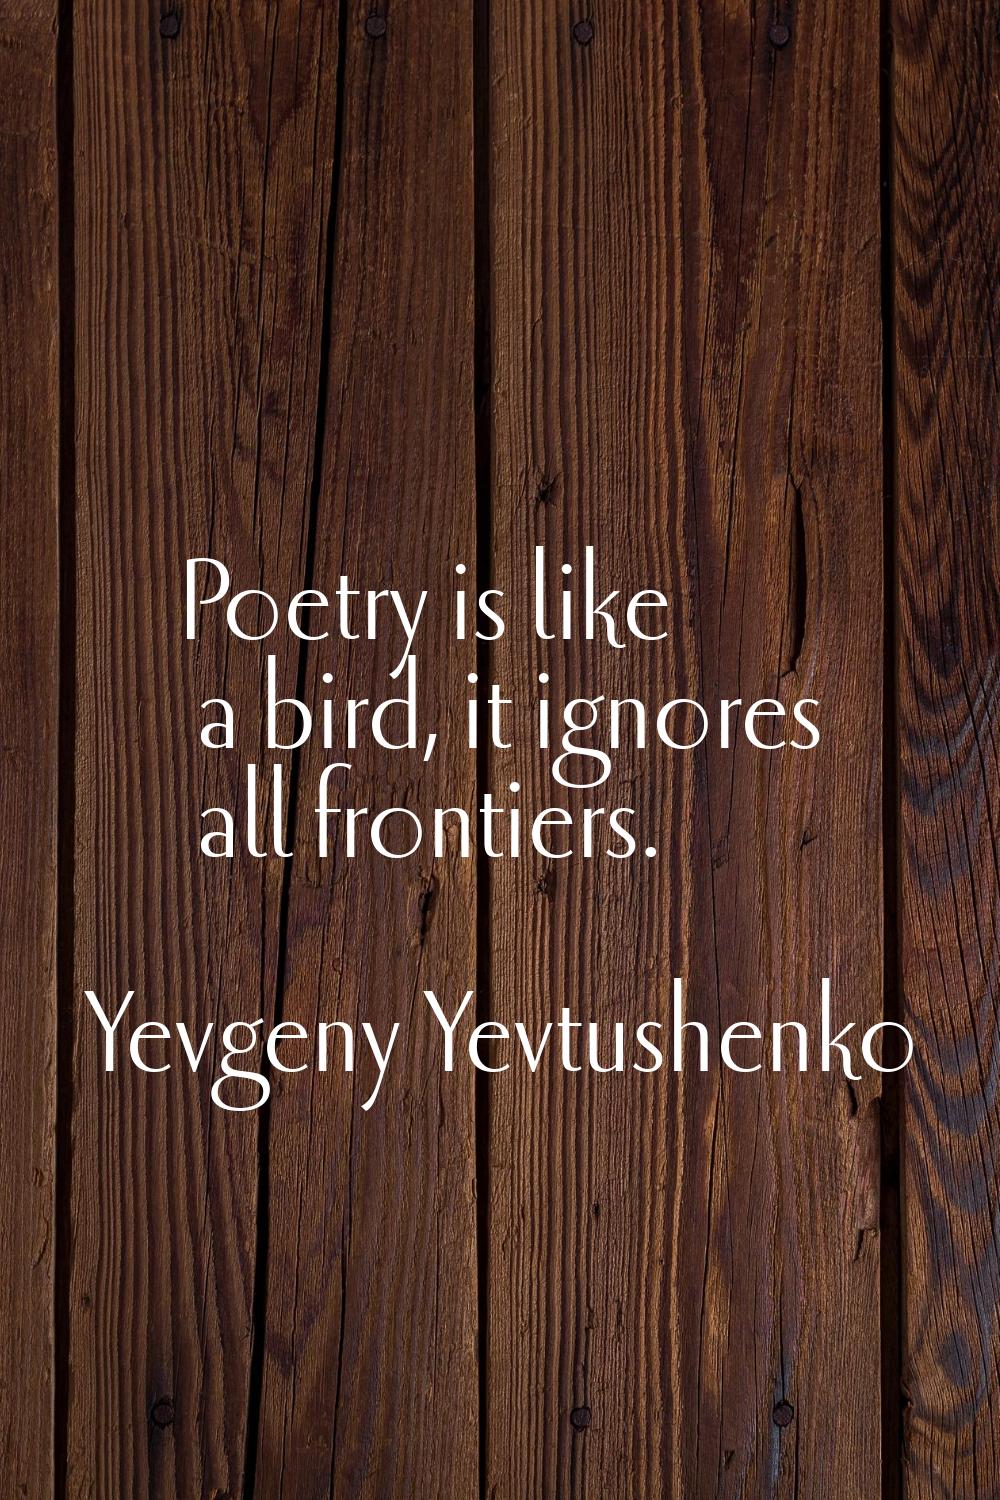 Poetry is like a bird, it ignores all frontiers.